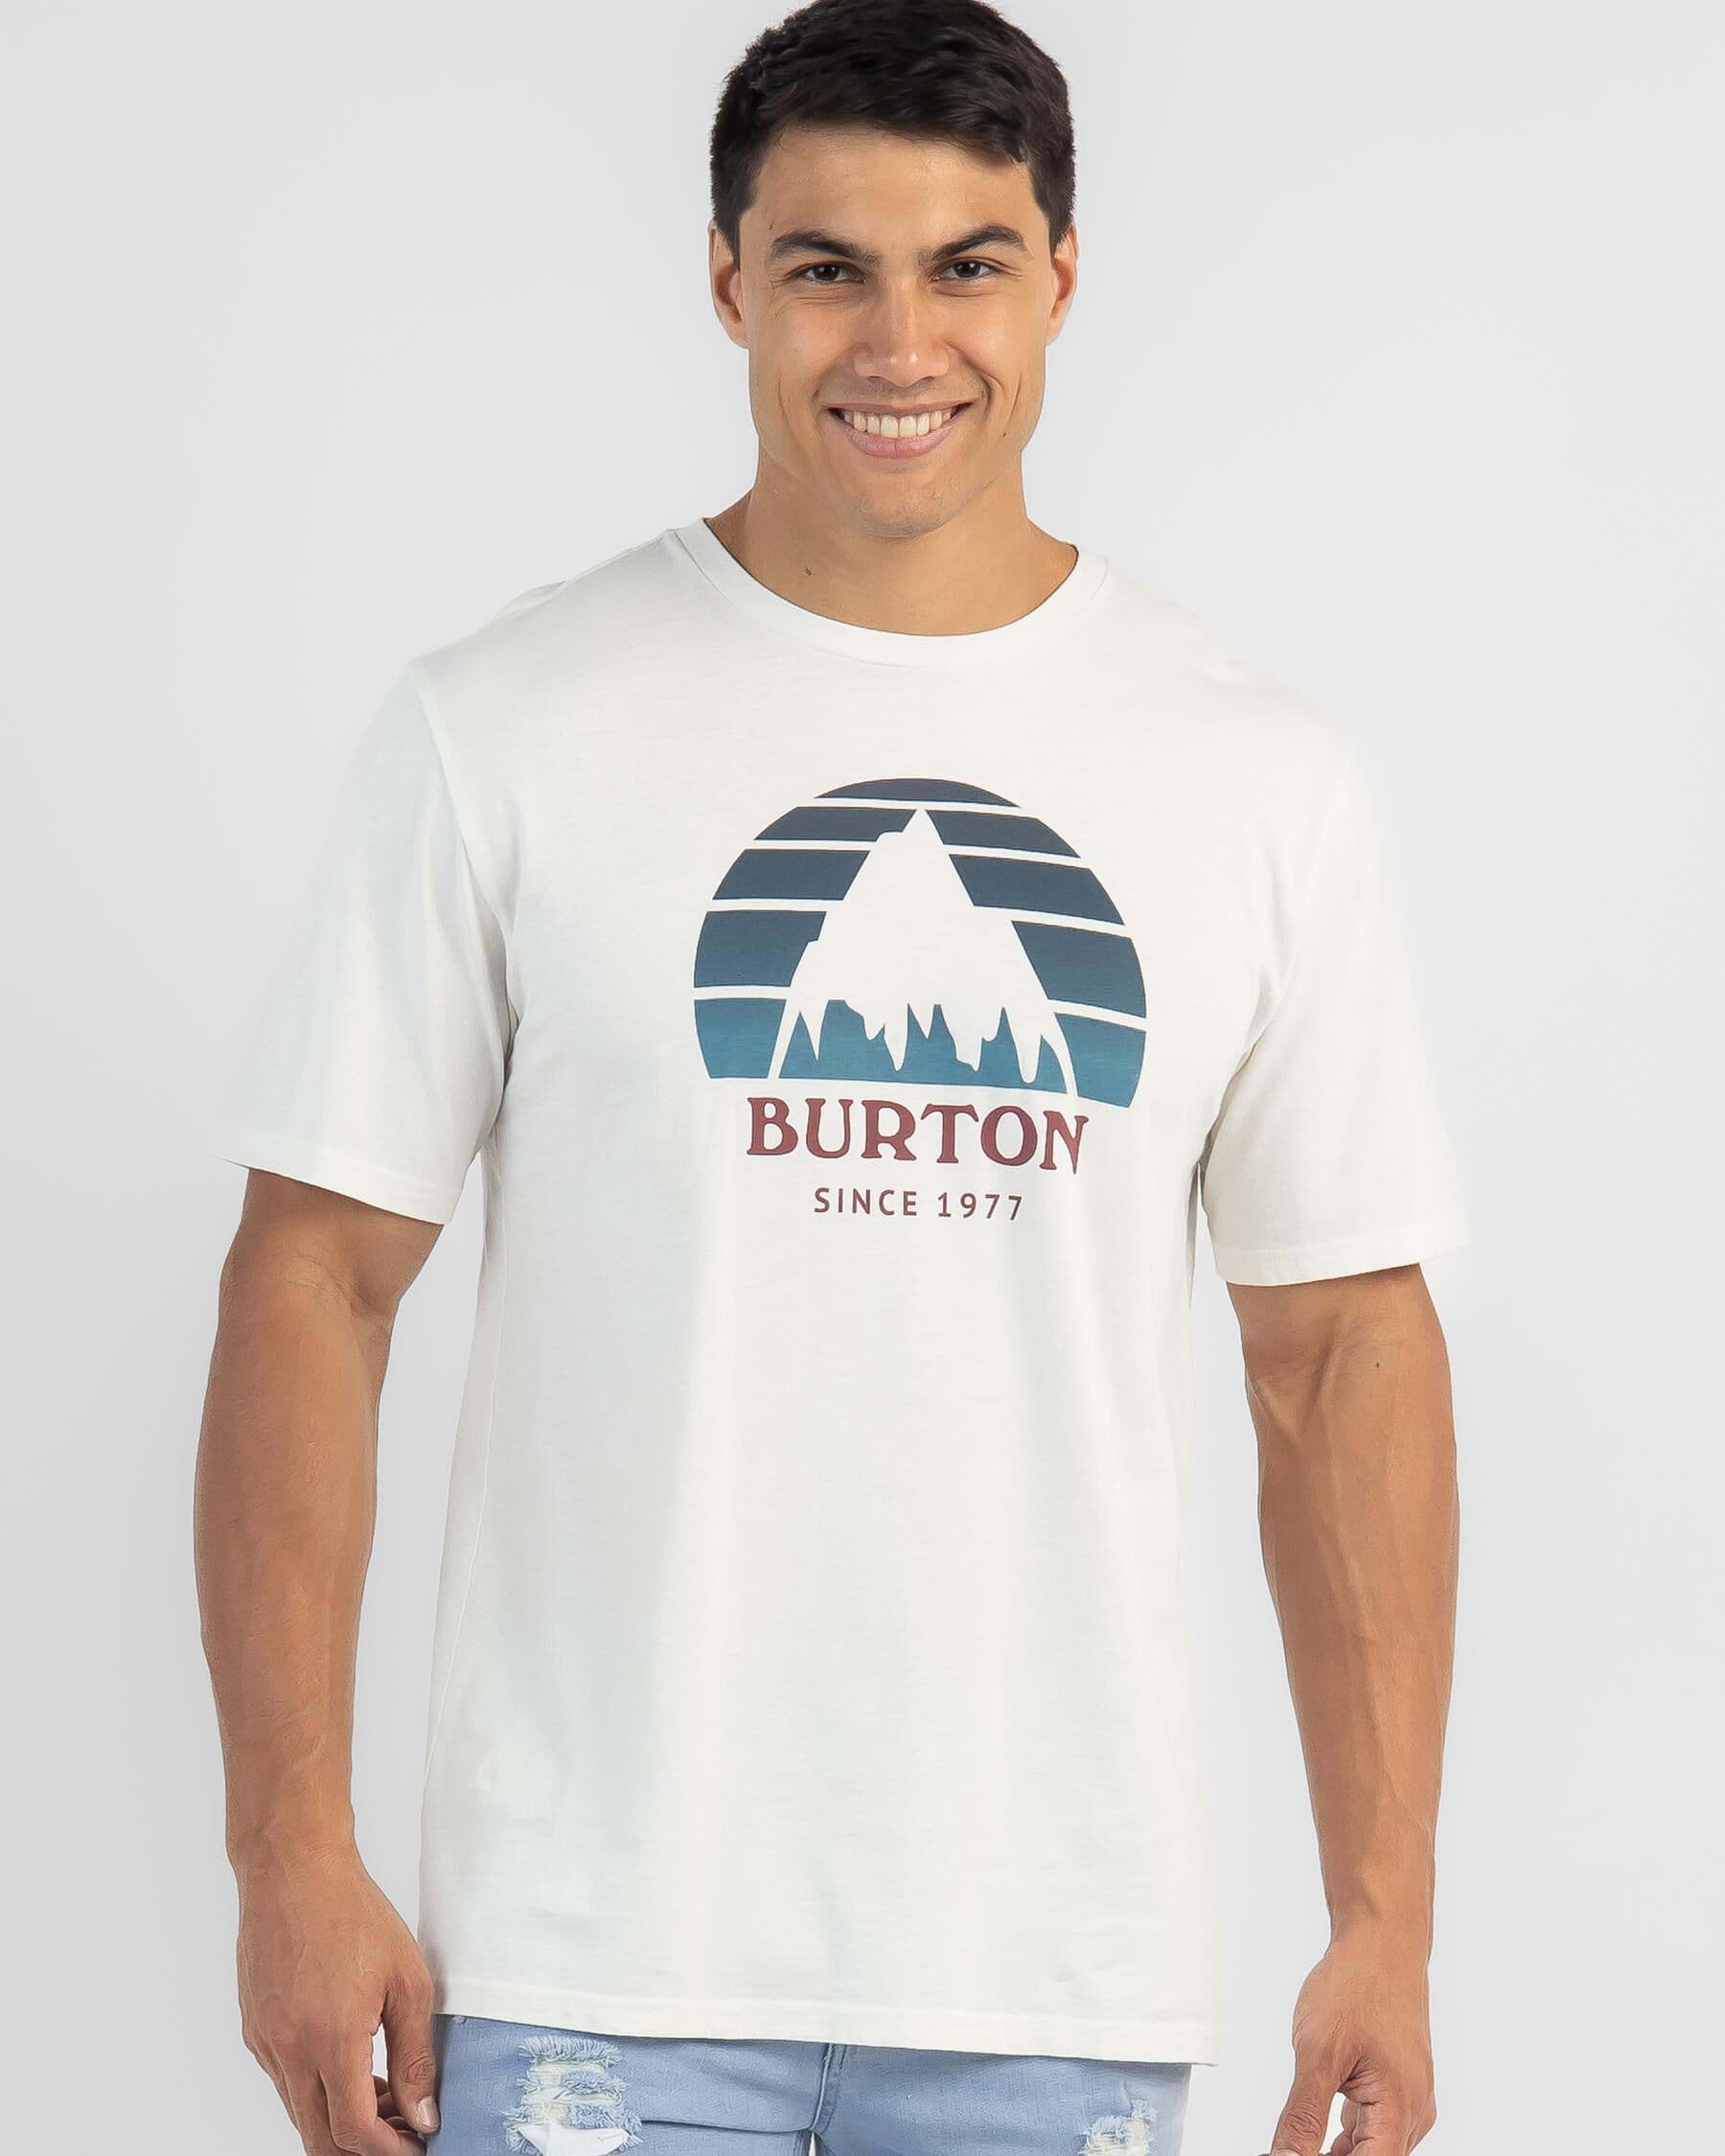 Shop Burton Online - Fast Shipping and Easy Returns